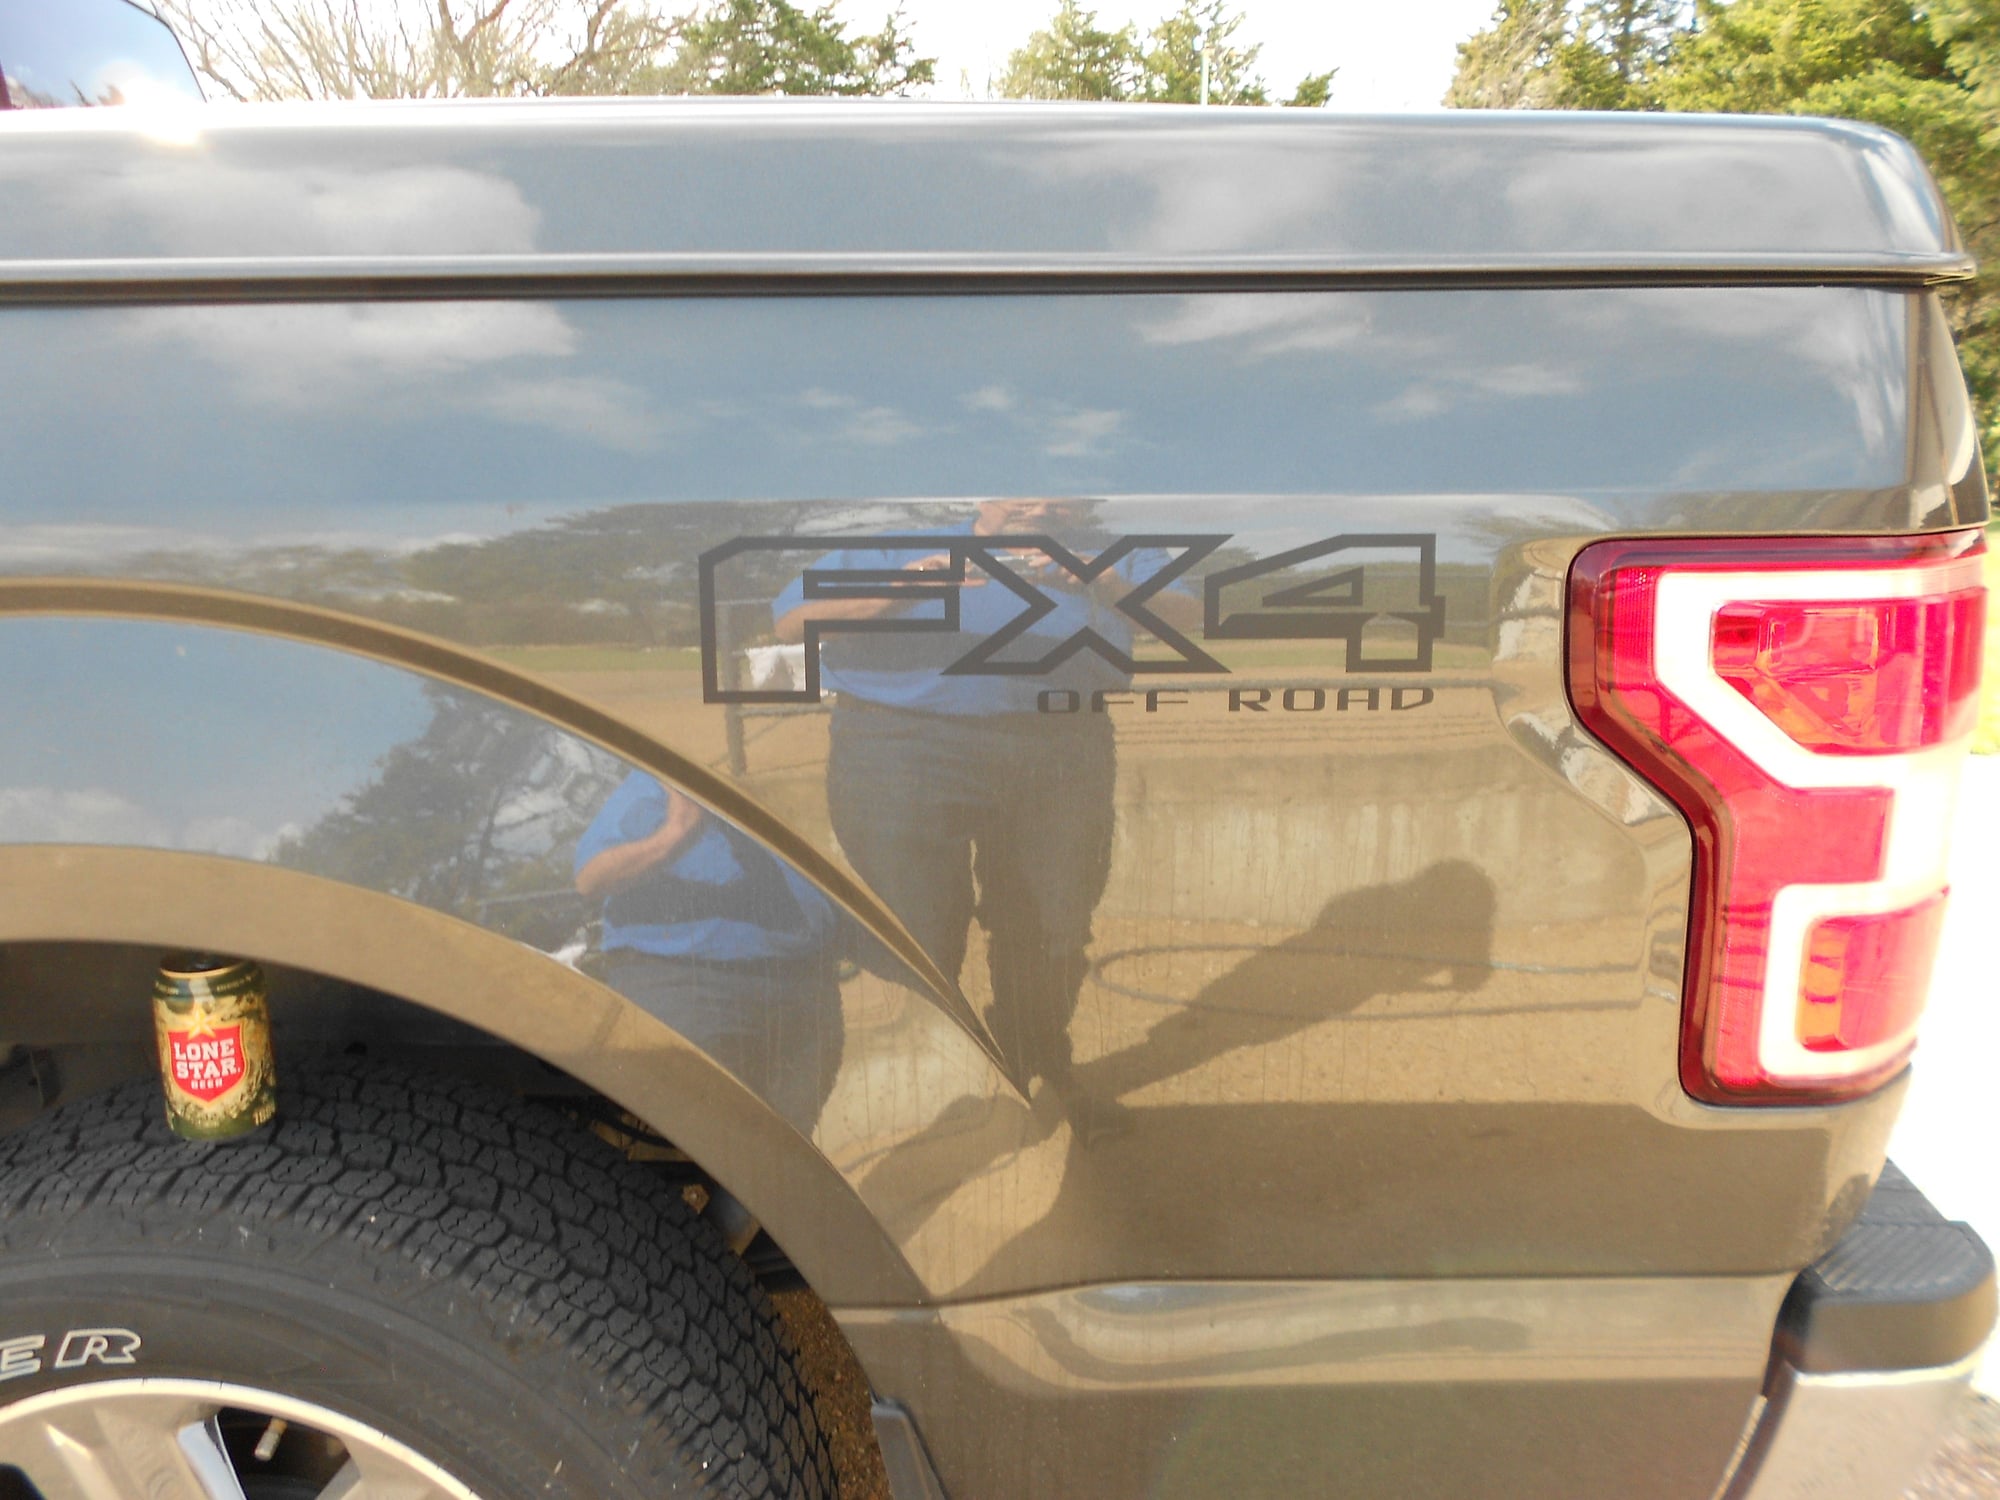 Removal of FX4 decals - Ford F150 Forum - Community of Ford Truck Fans